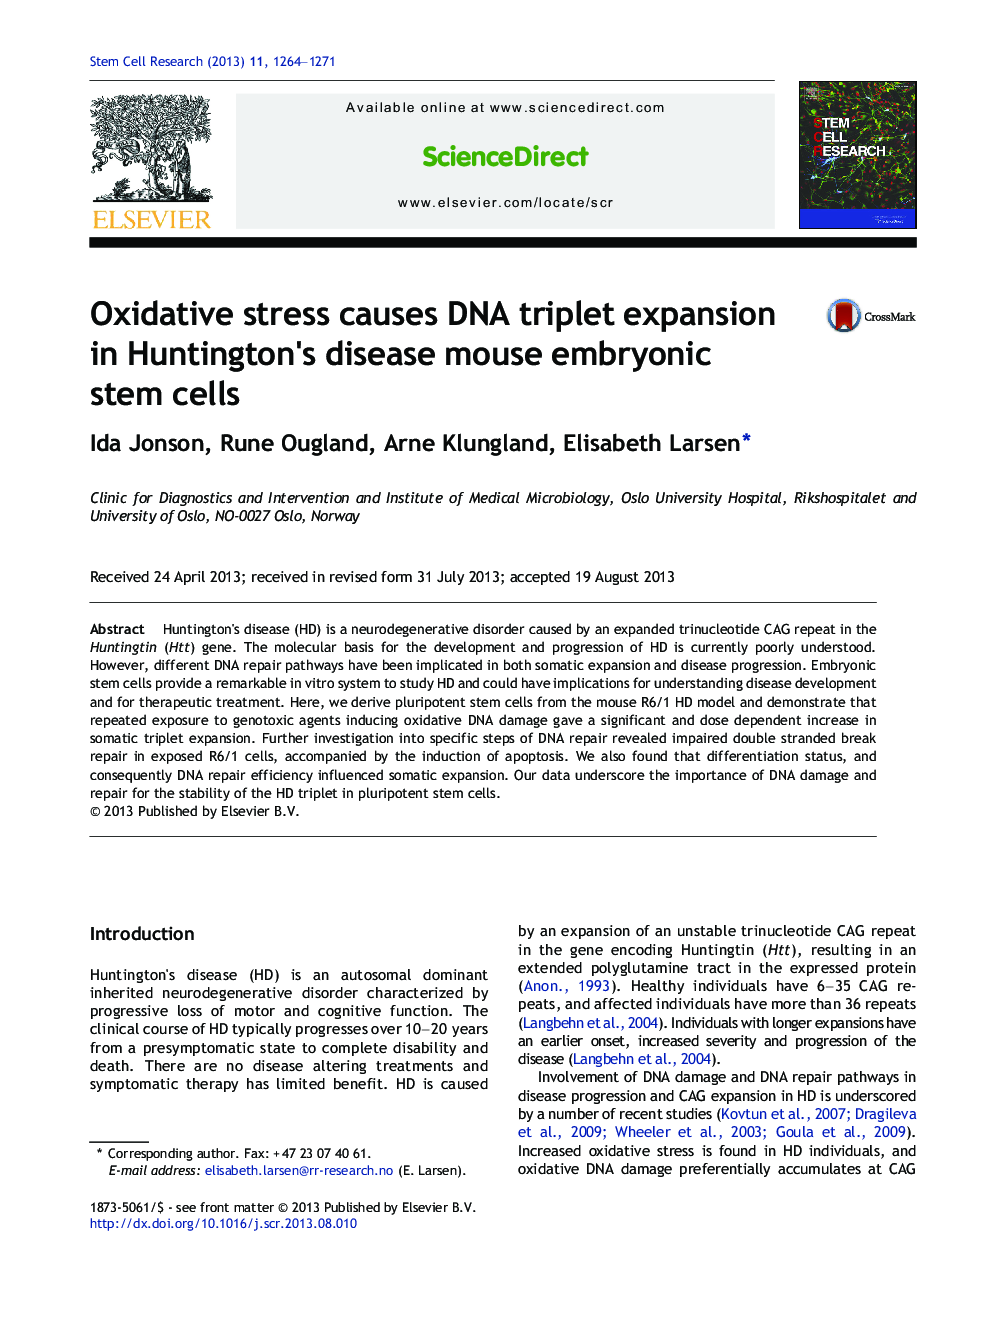 Oxidative stress causes DNA triplet expansion in Huntington's disease mouse embryonic stem cells